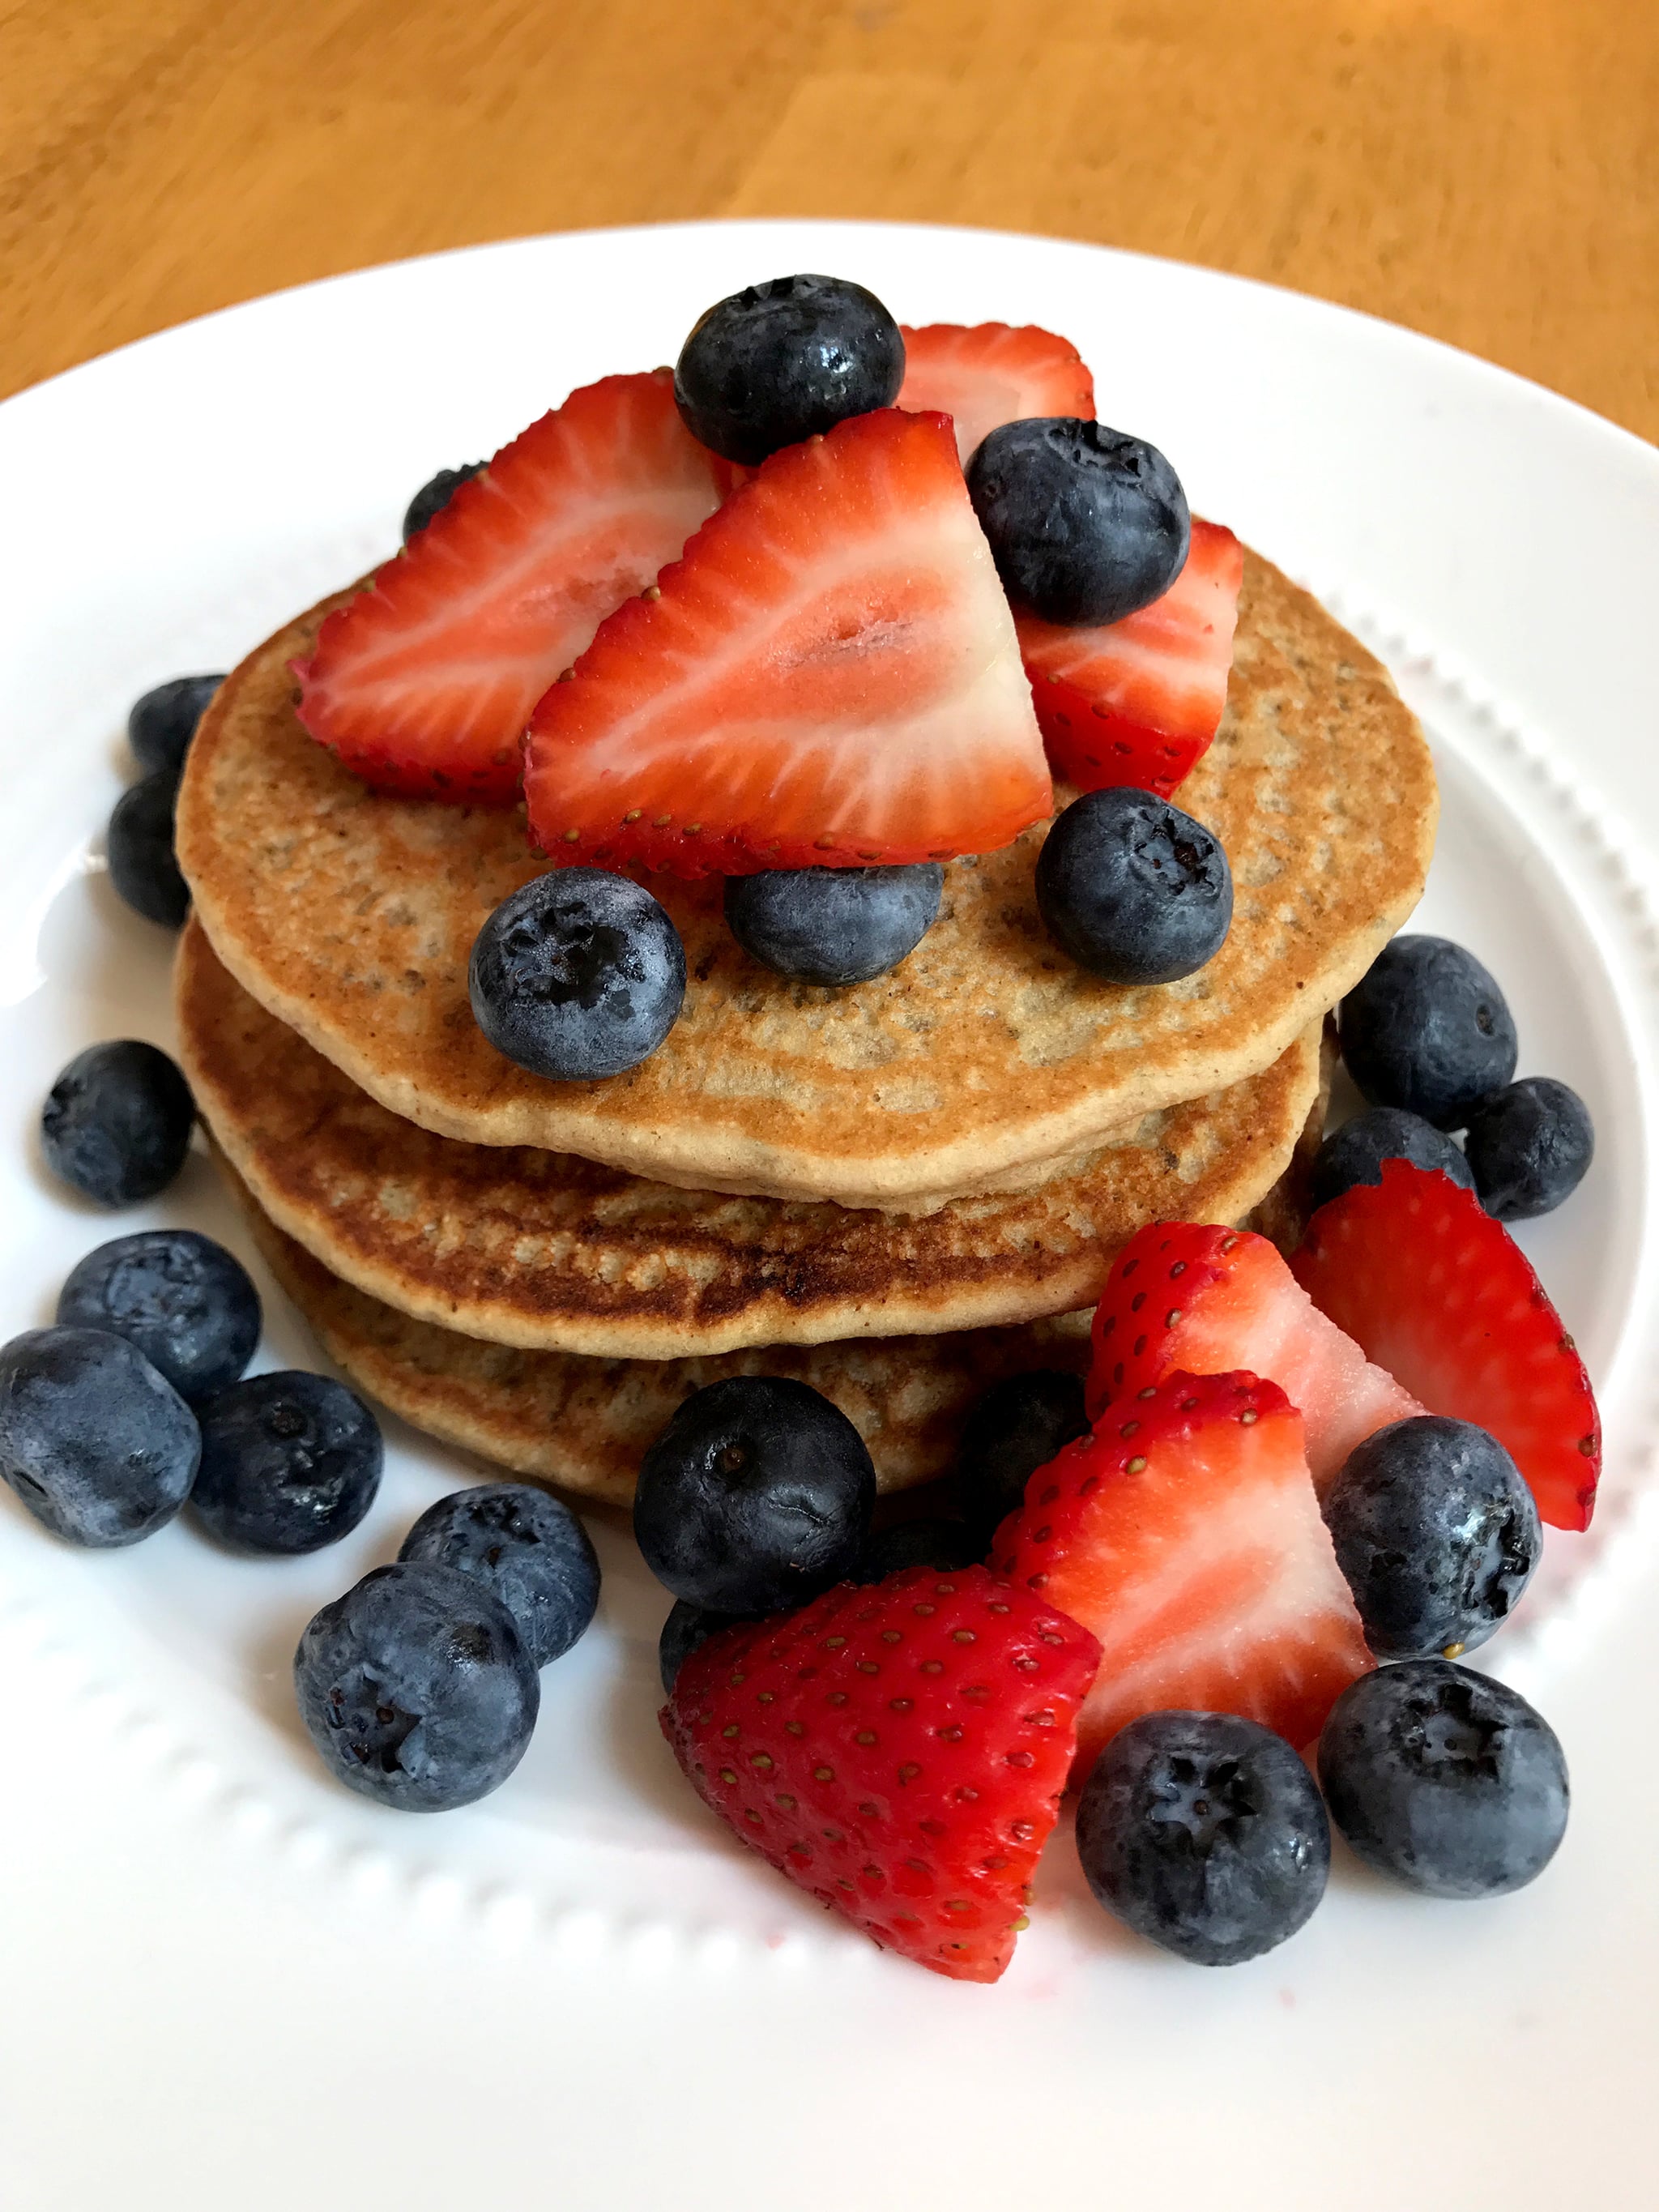 Easy Vegan Protein Pancakes With 4 Grams of Protein - The